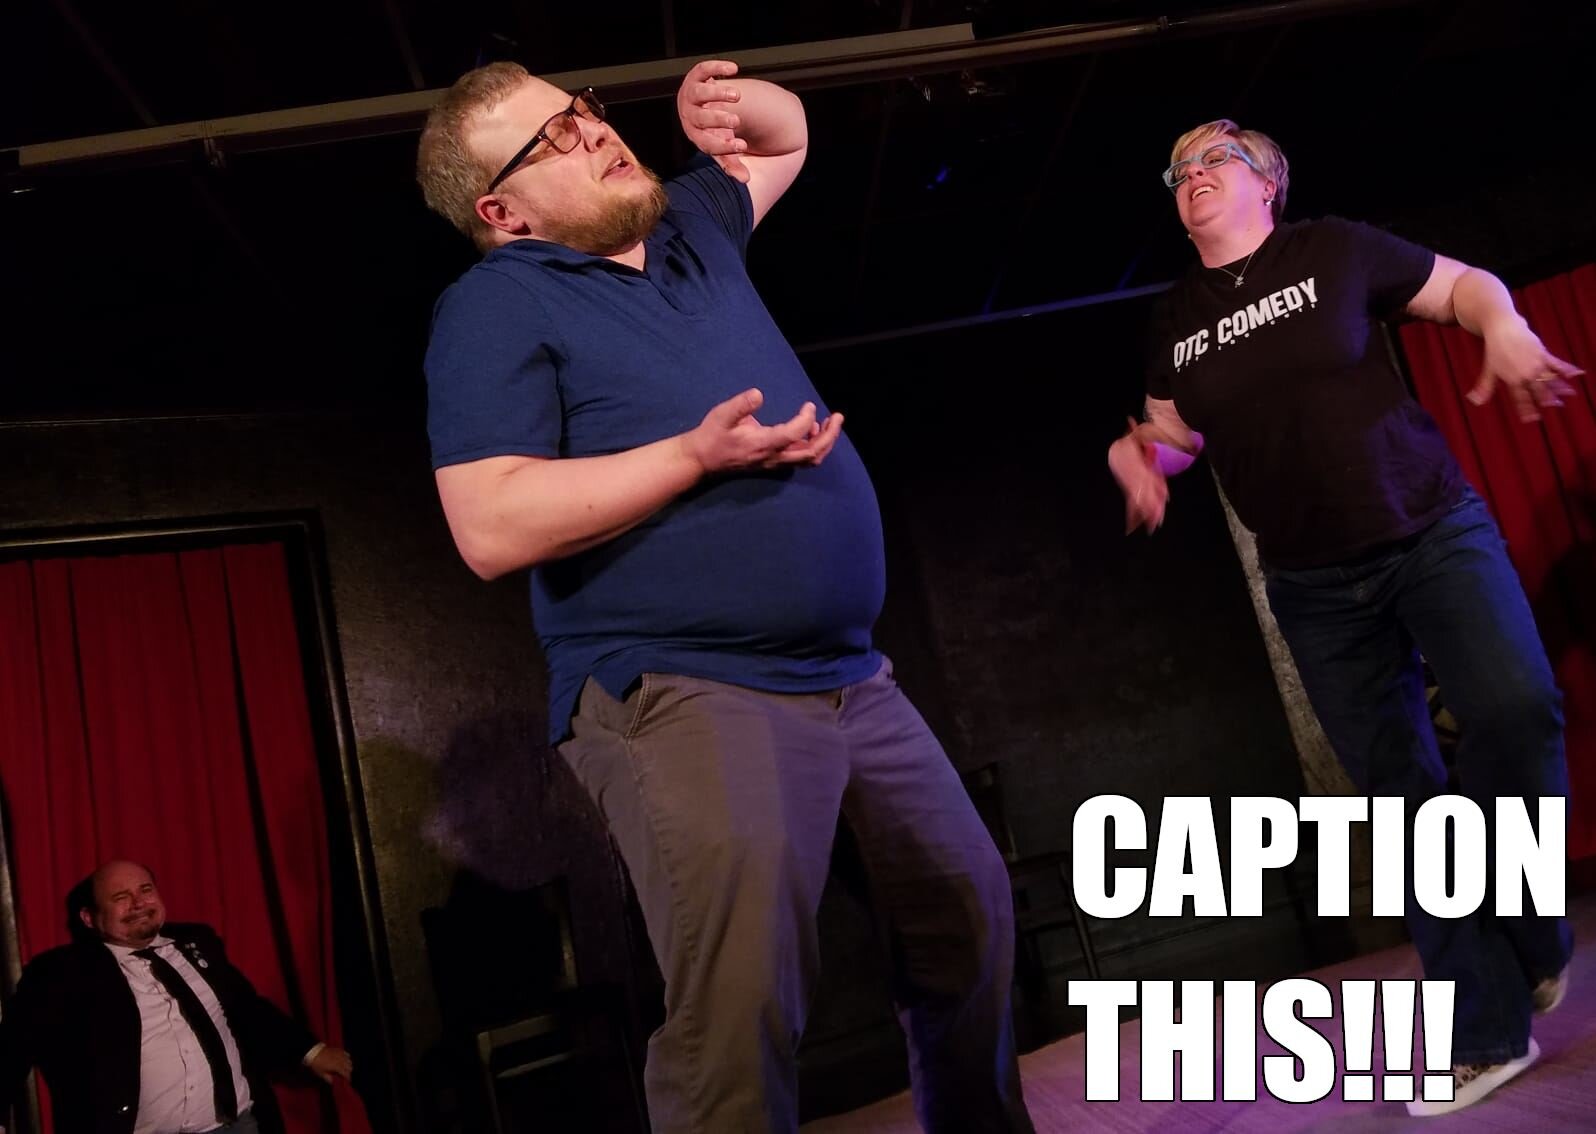 This Step-Out Tuesday we want you to CAPTION THIS PHOTO!!! Comment the funniest caption or dialogue you can think of for this bonkers scene, and our favorite comment will win a FREE PASS to this Friday's show! Winning comment will be selected on Thur